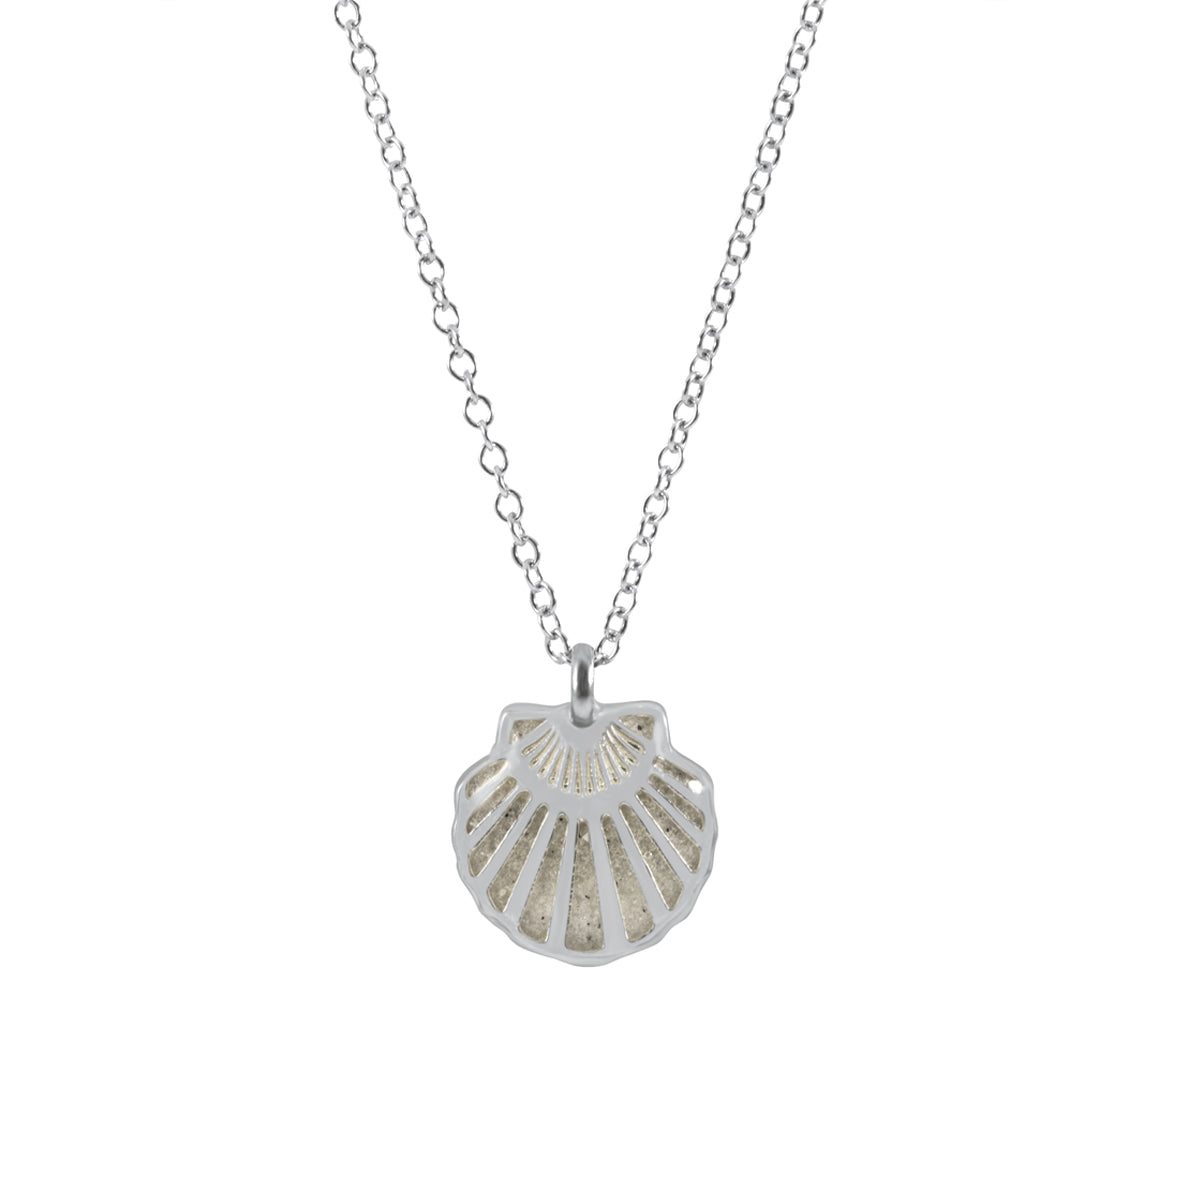 Scallop Shell Necklace - Silver